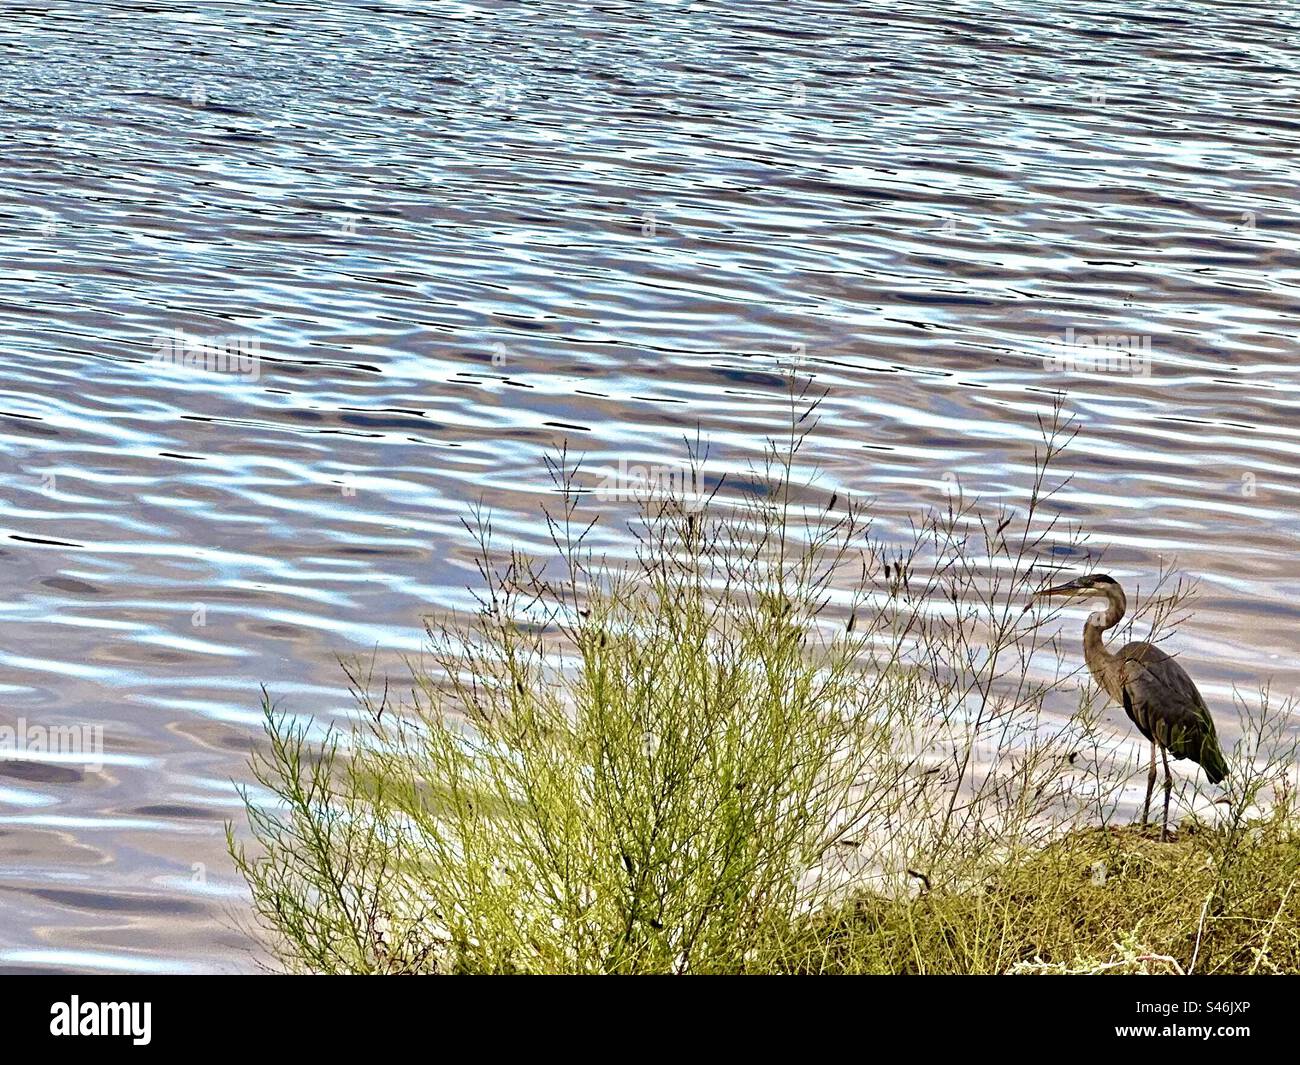 Great blue heron standing on shore , looking toward rippling water. These large wading birds inhabit wetlands throughout much of North America. Stock Photo